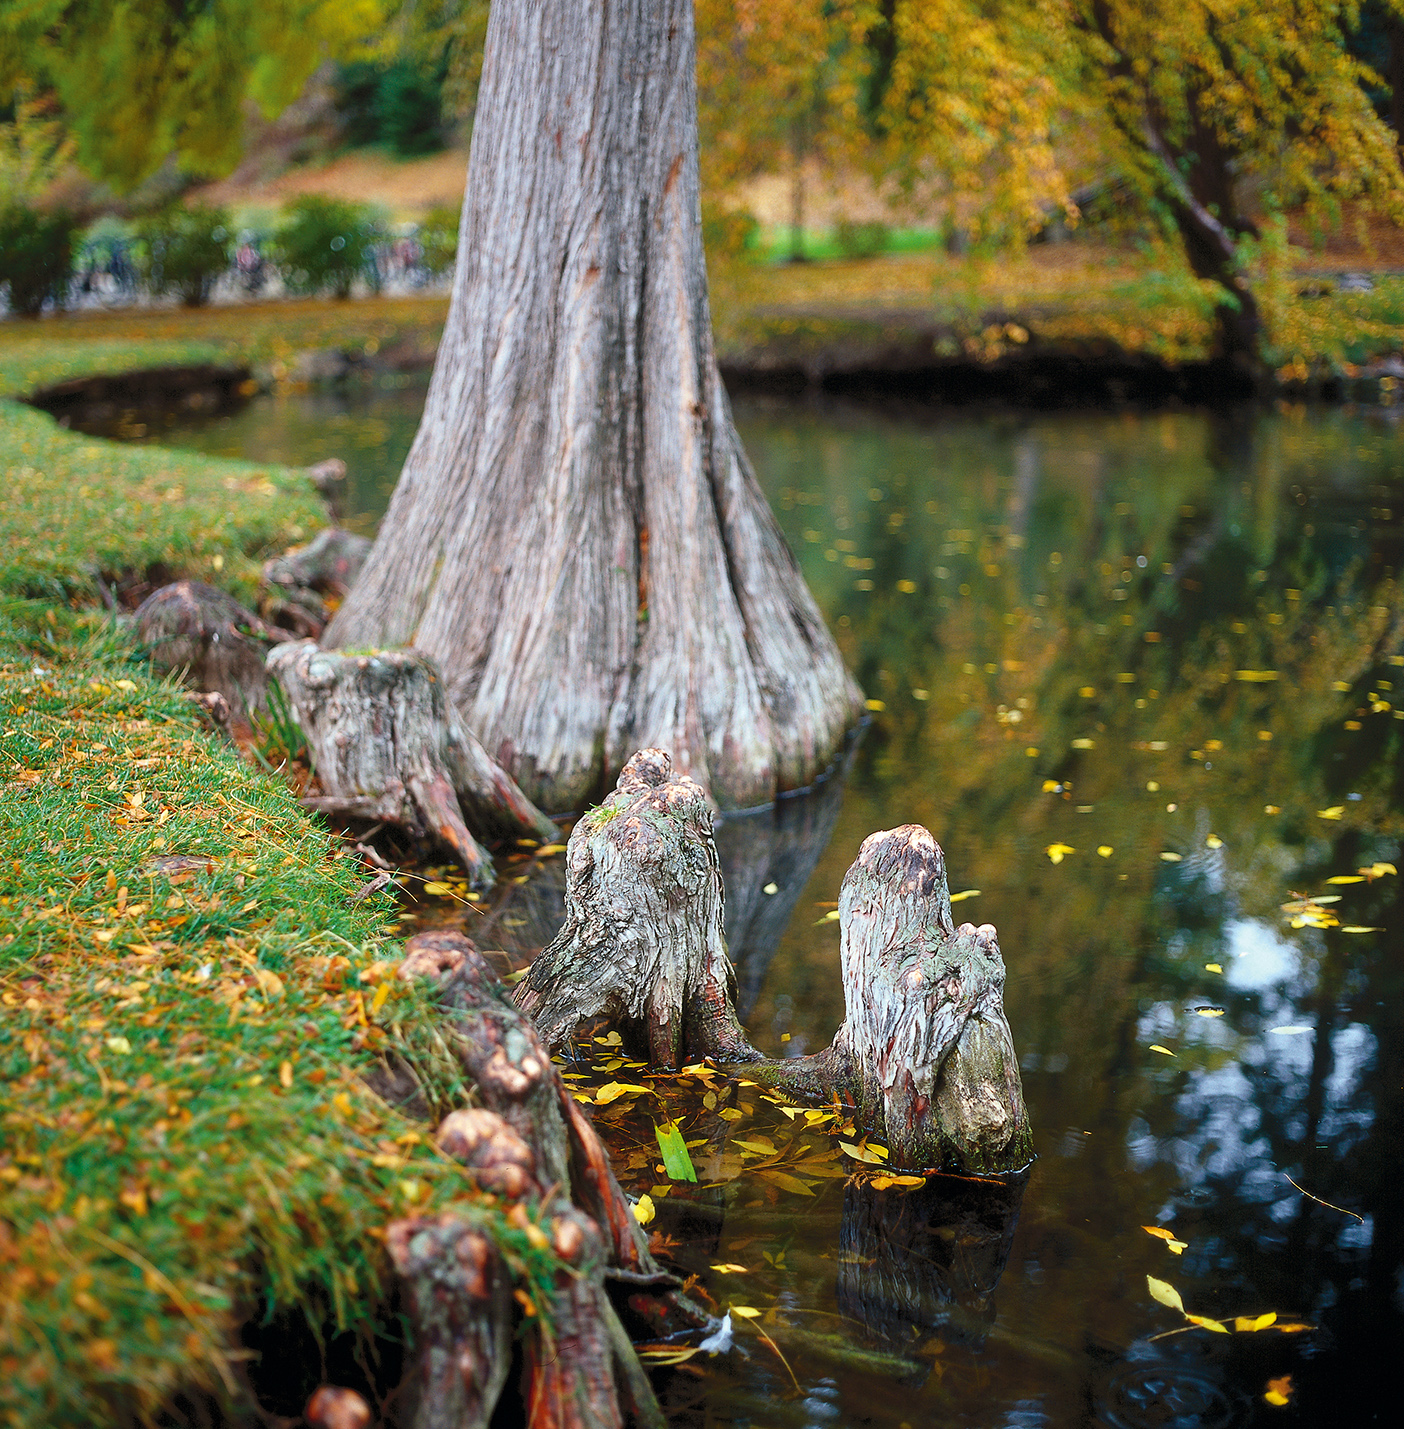 A bald cypress tree by the Botany Pond on BYU campus.